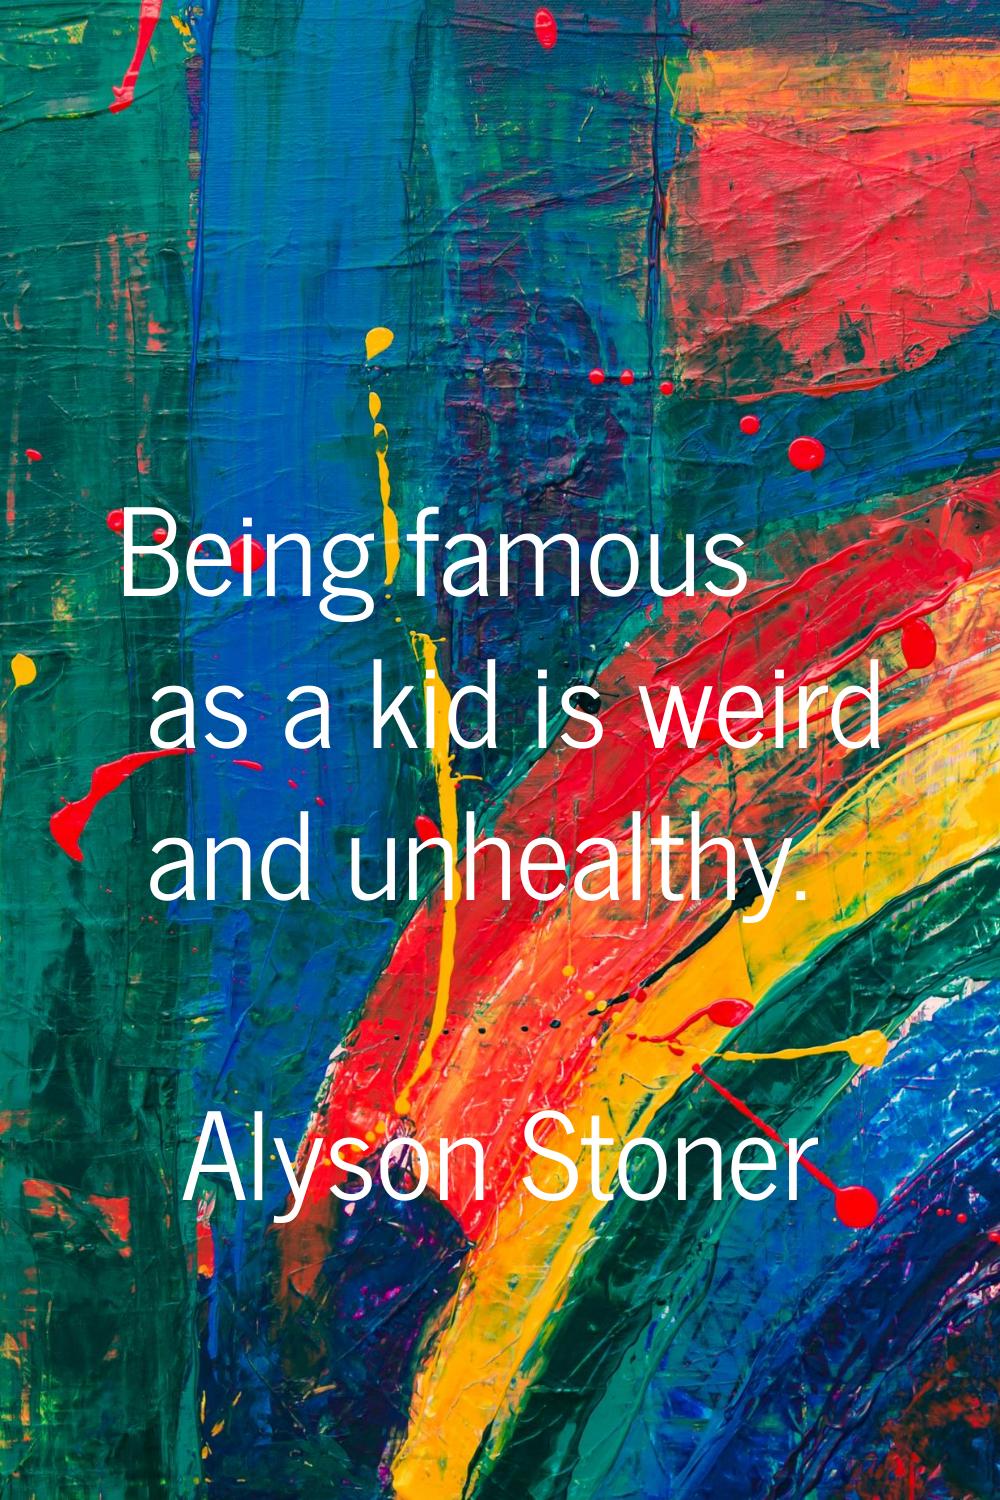 Being famous as a kid is weird and unhealthy.